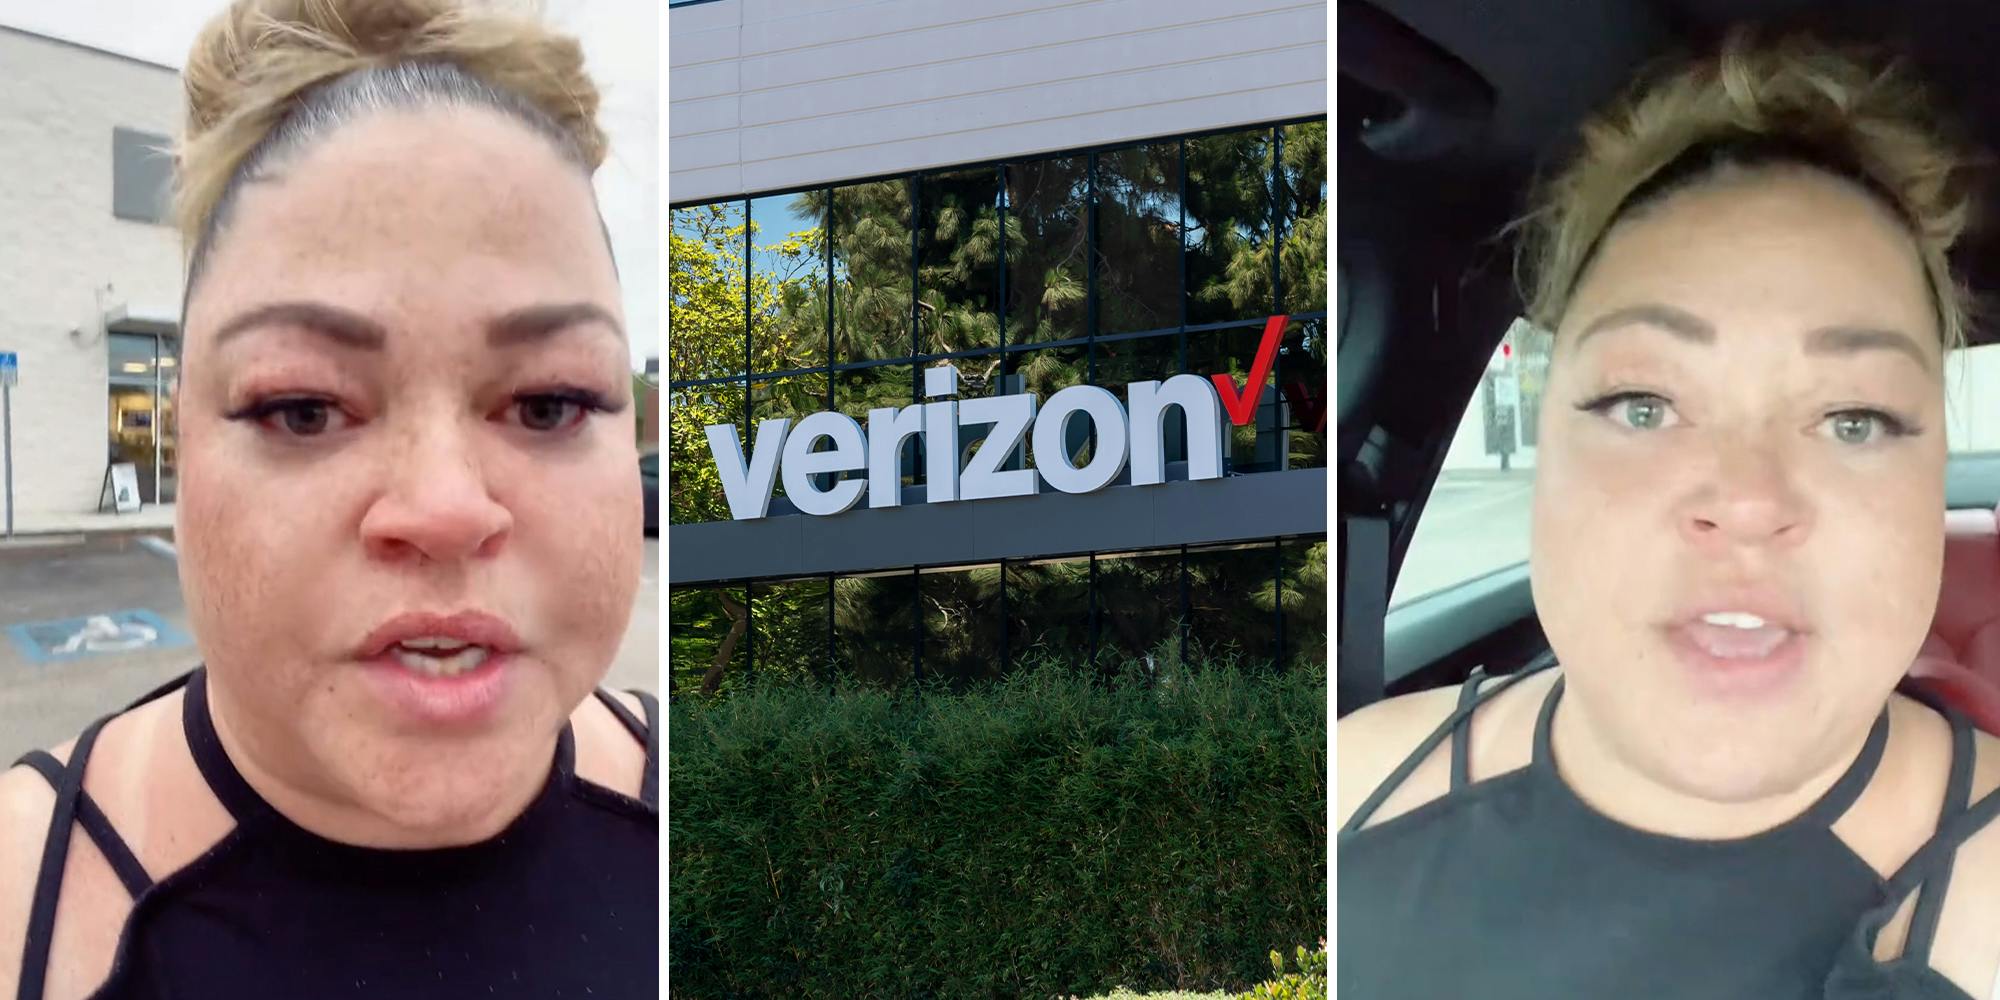 Woman says Verizon charged her $10K. She was only a customer for 1 week